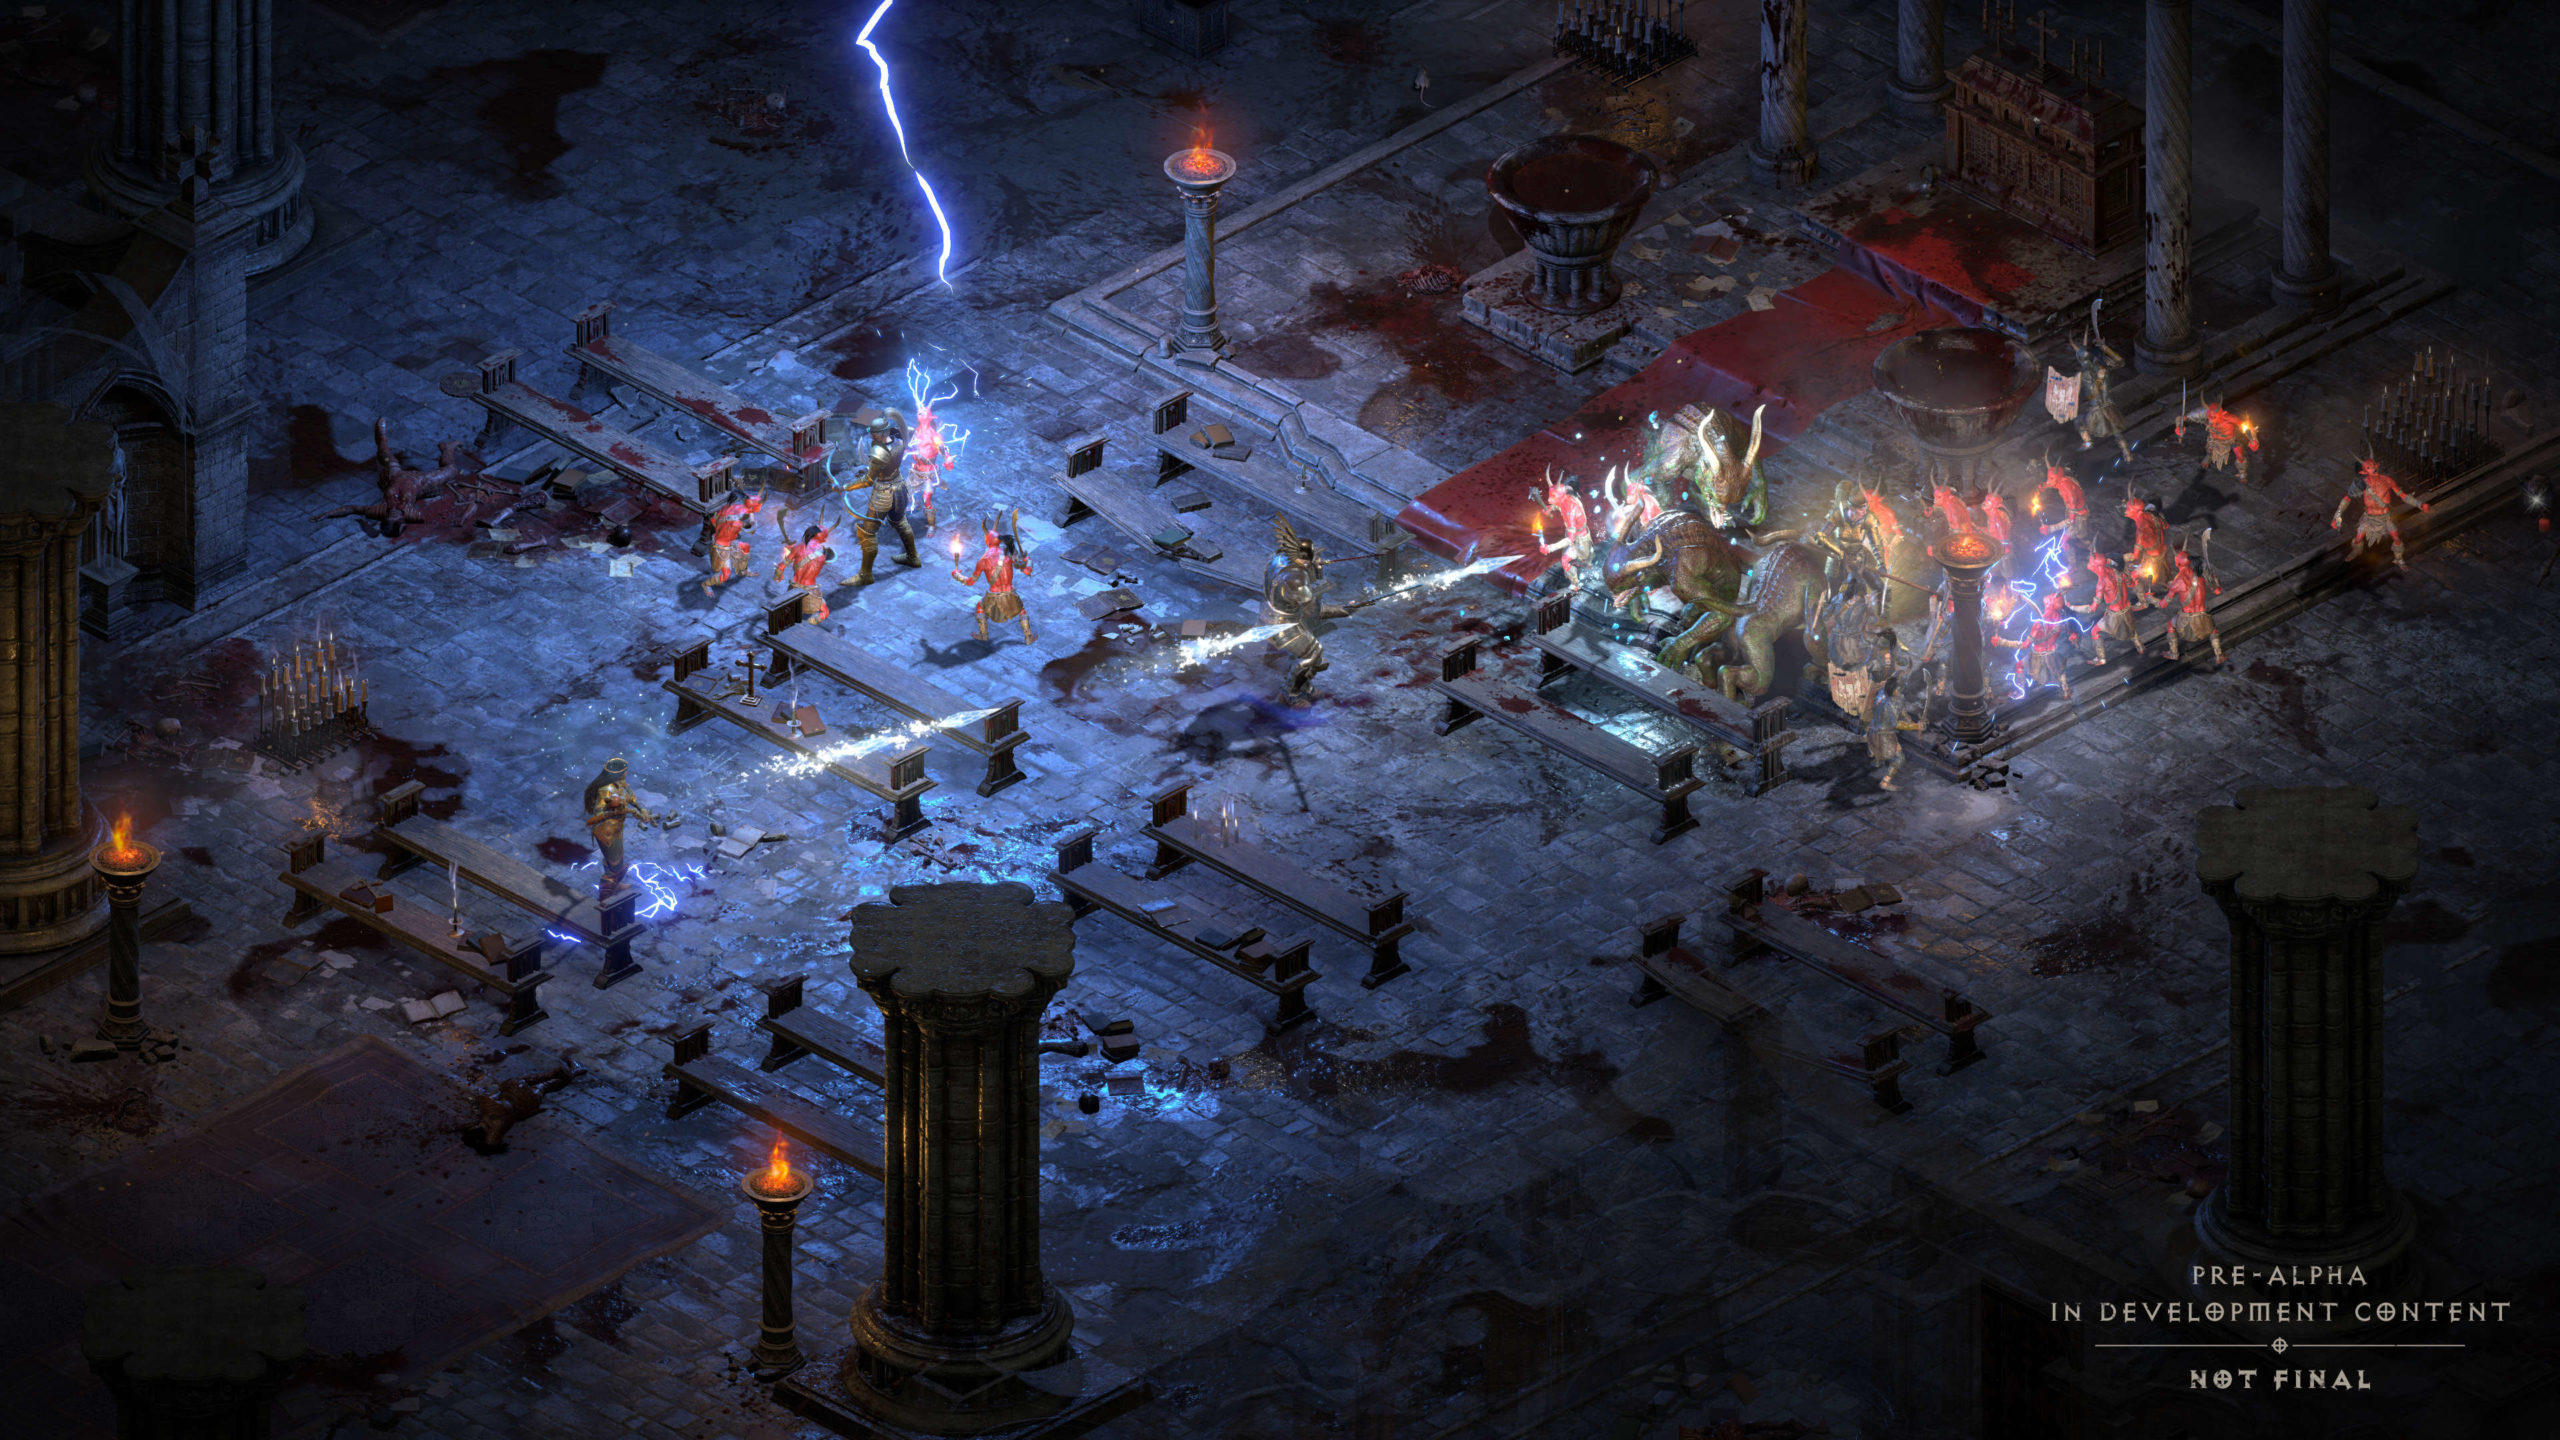 download diablo 3 xbox one for free